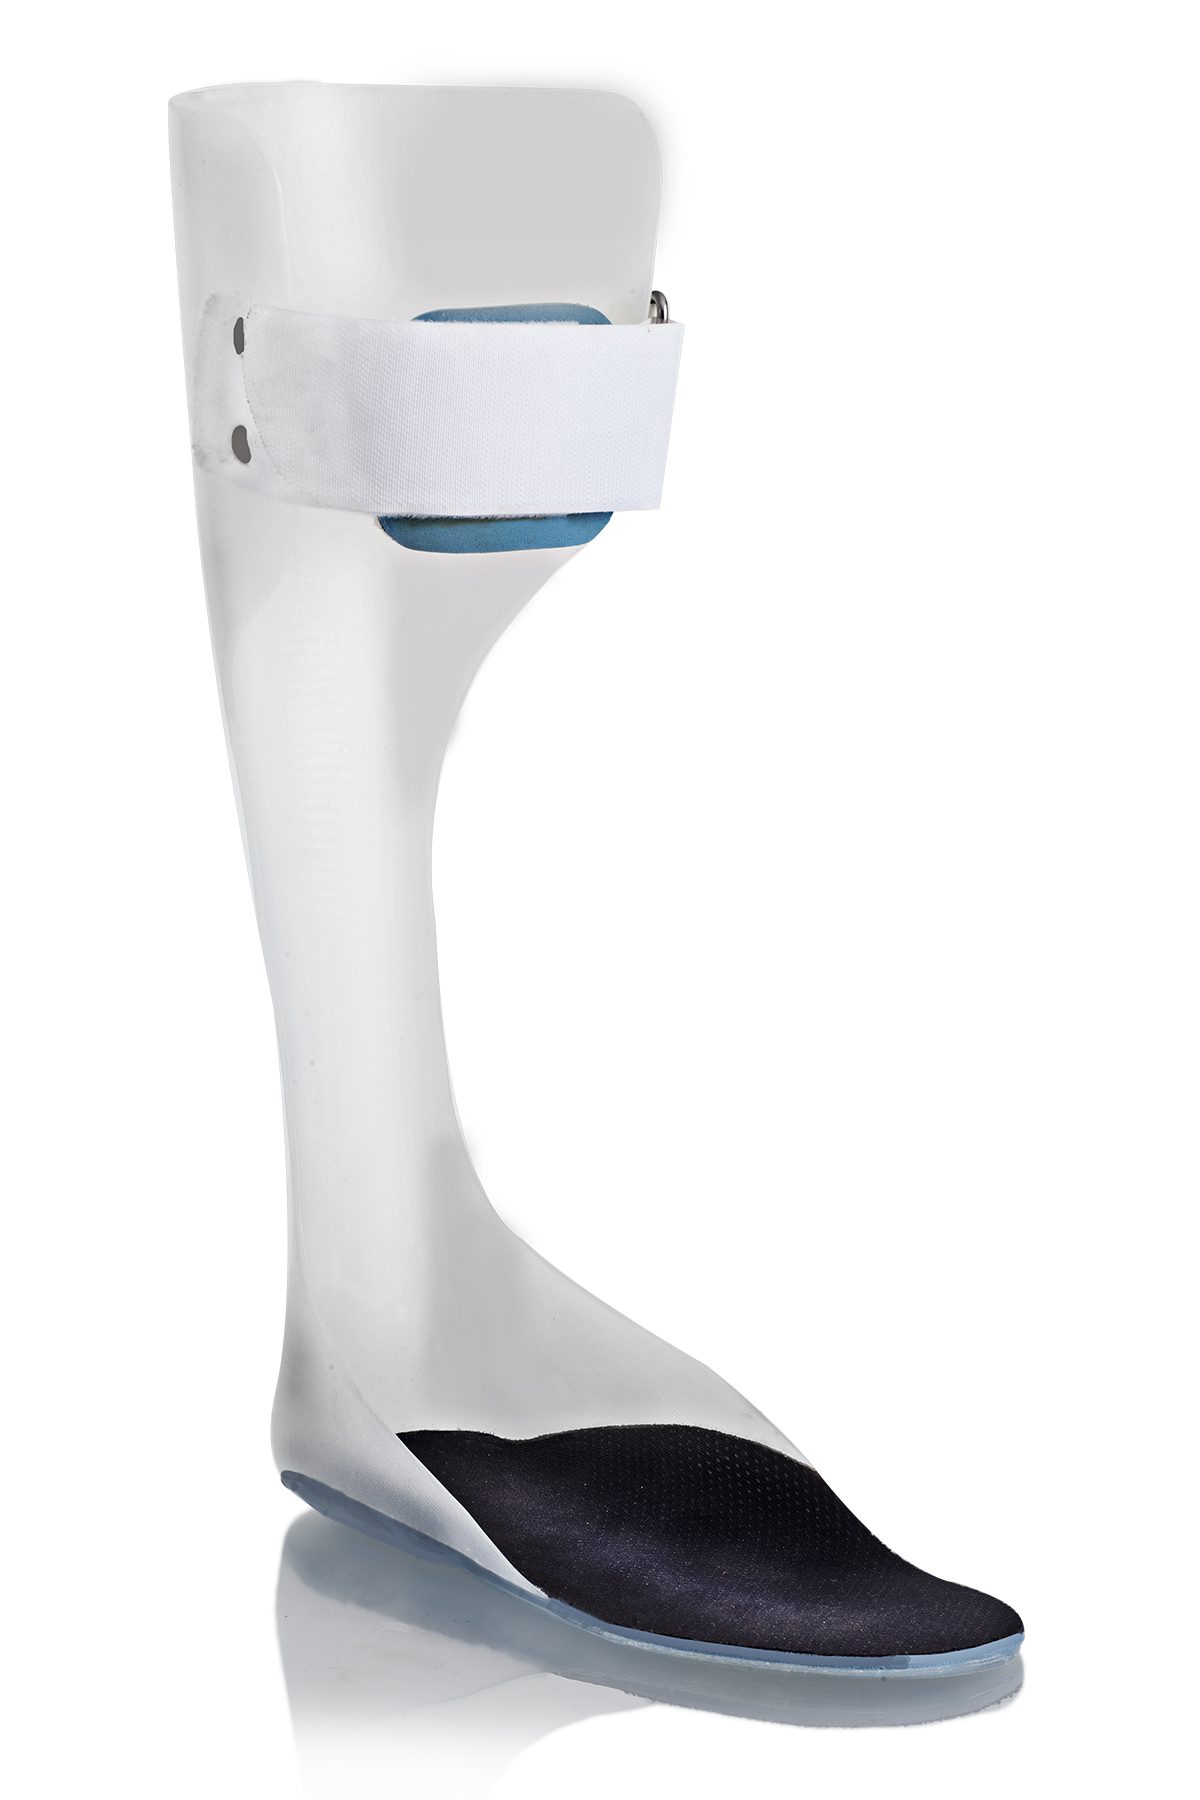 Ankle Foot Orthotics (AFOs)